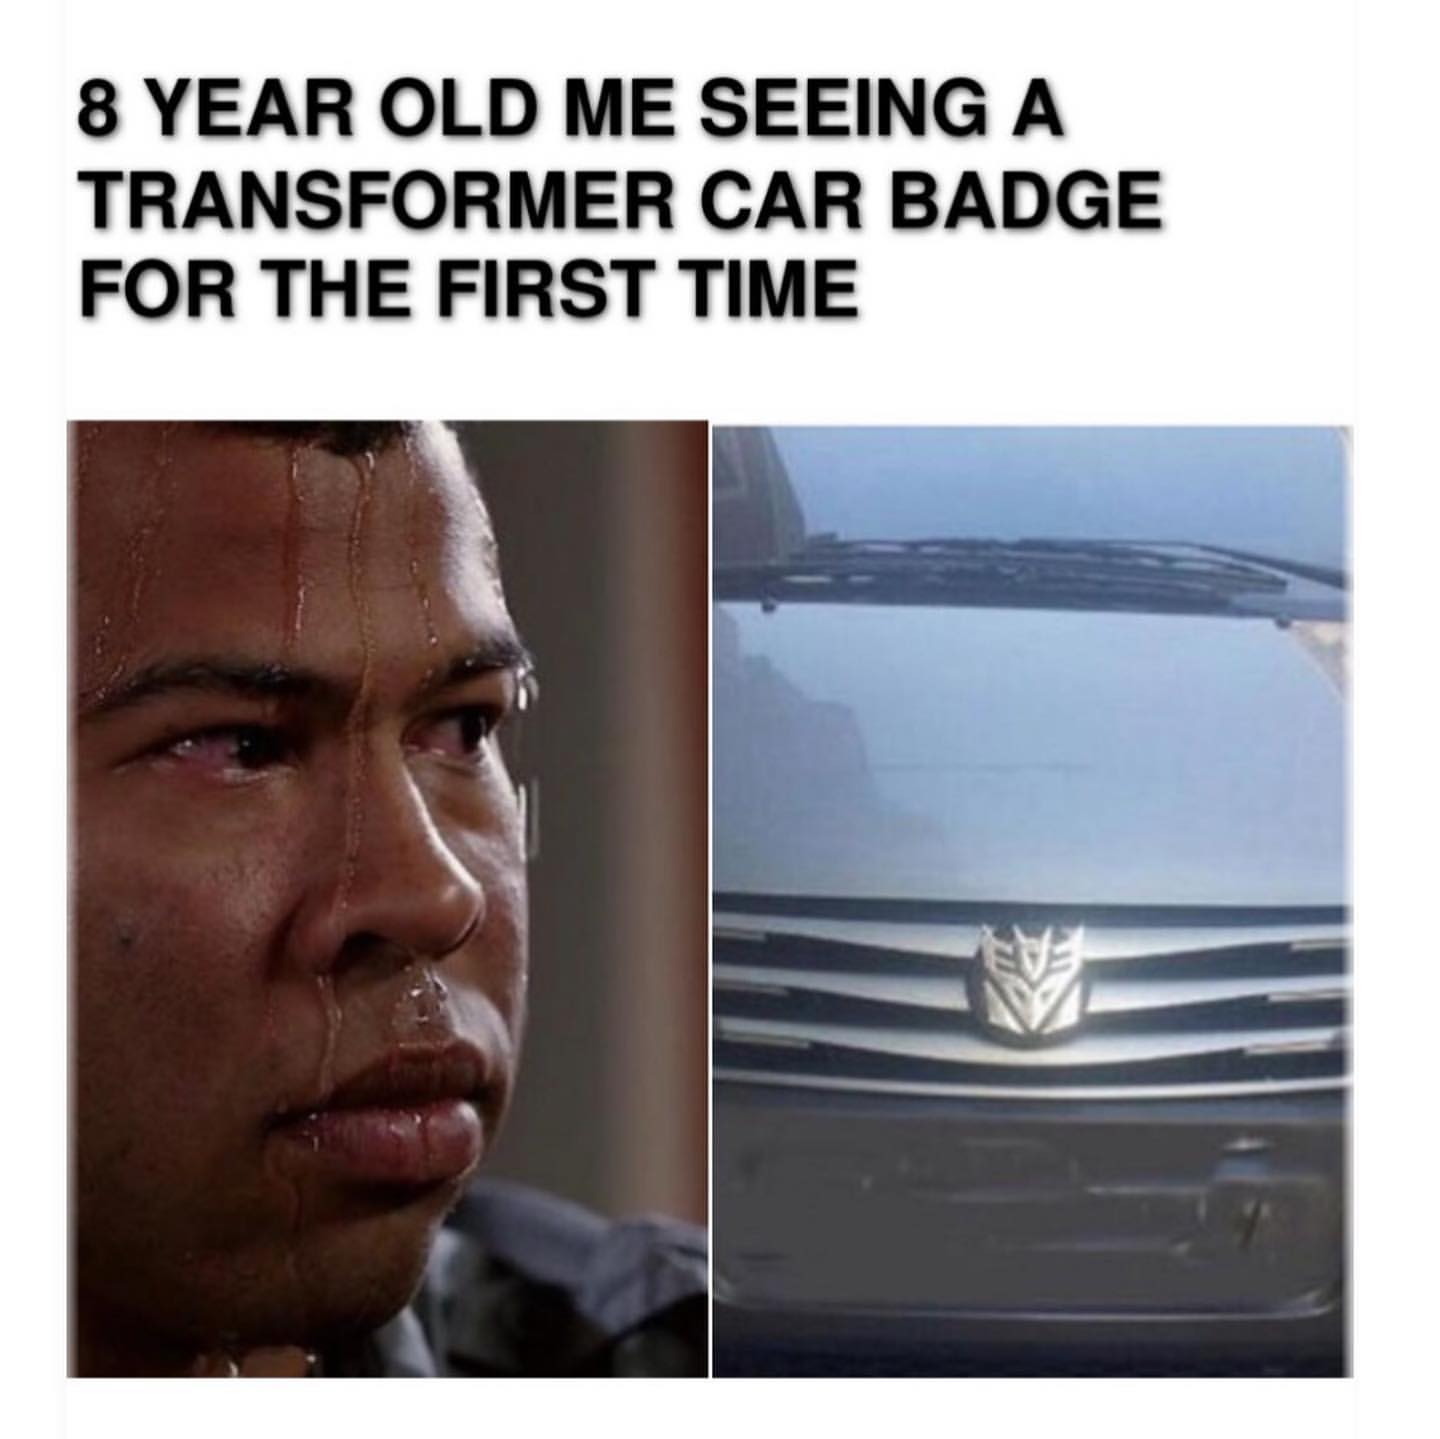 8 year old me seeing a transformer car badge for the first time.